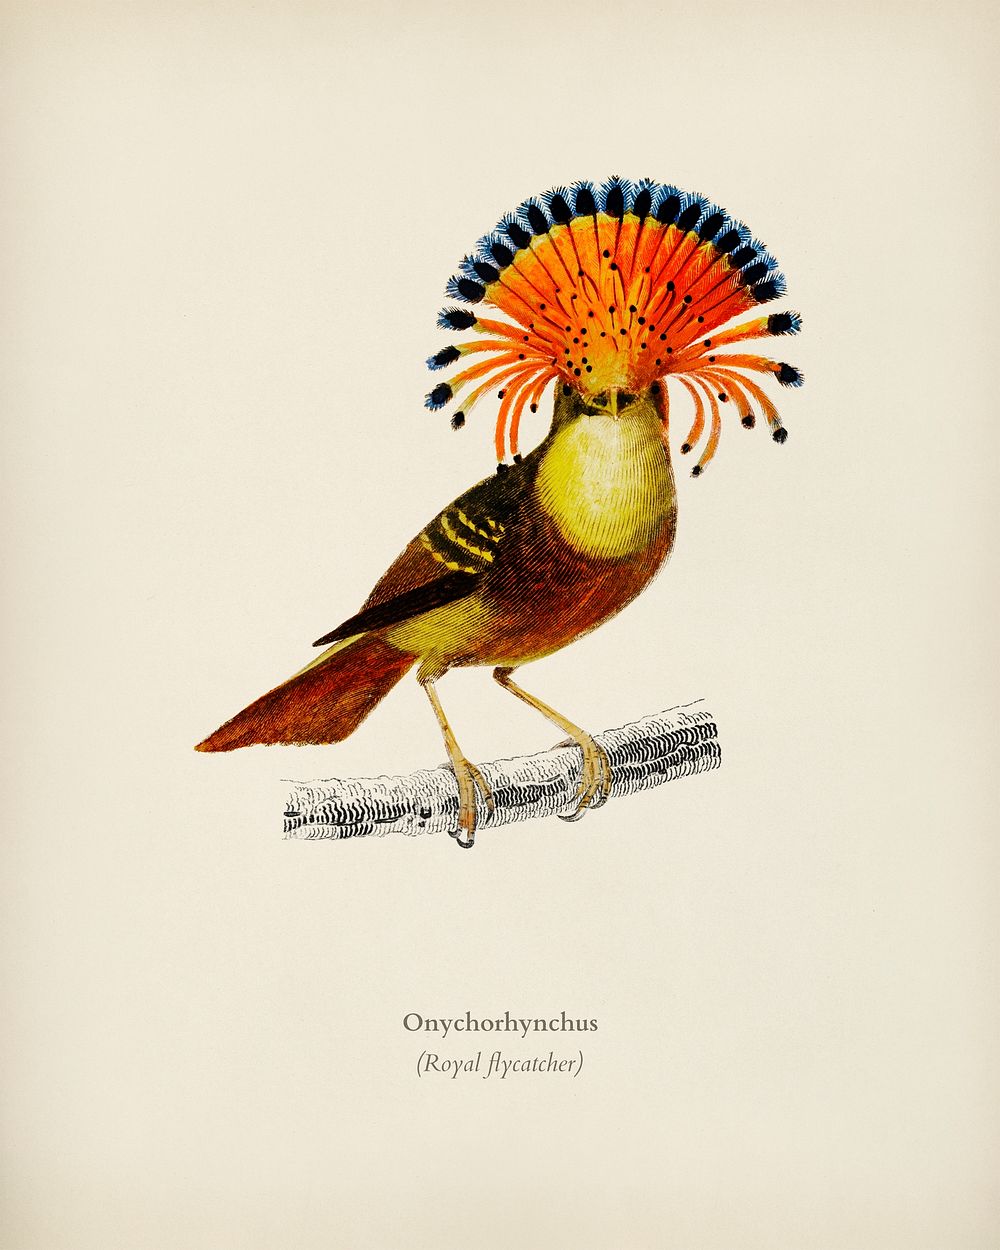 Royal flycatcher (Onychorhynchus) illustrated by Charles Dessalines D' Orbigny (1806-1876). Digitally enhanced from our own…